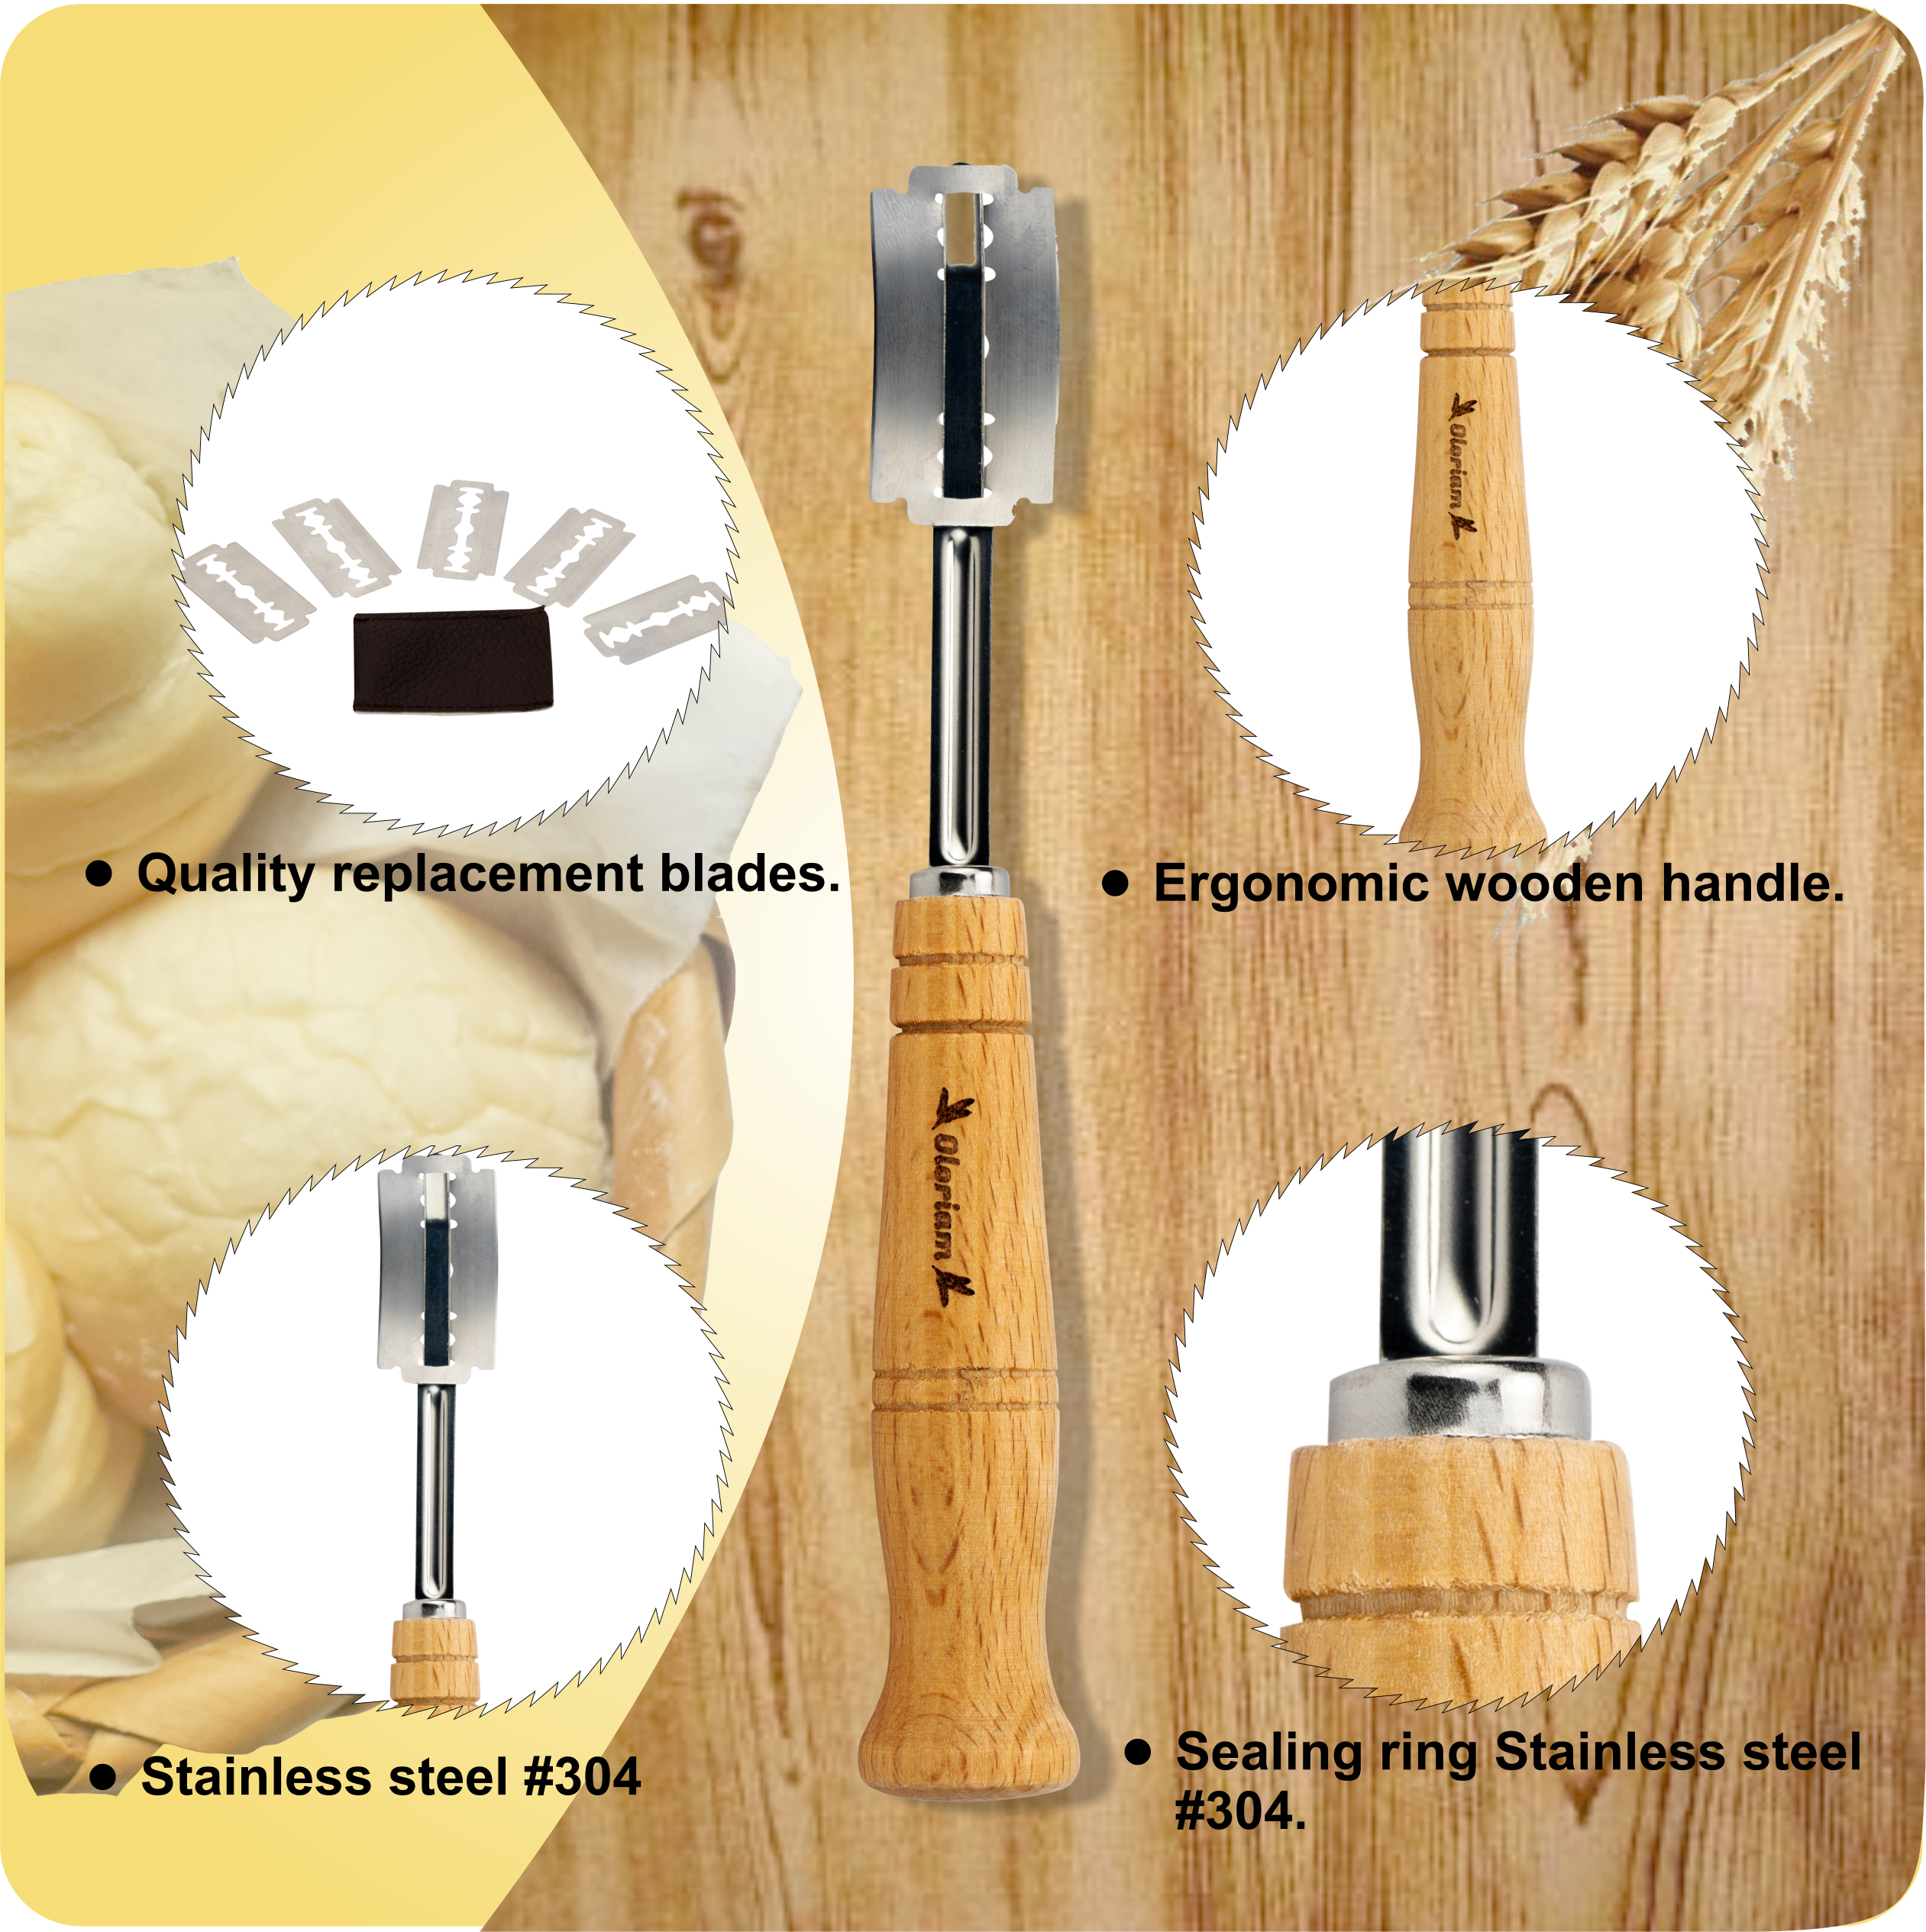 lame, wood handle - Whisk